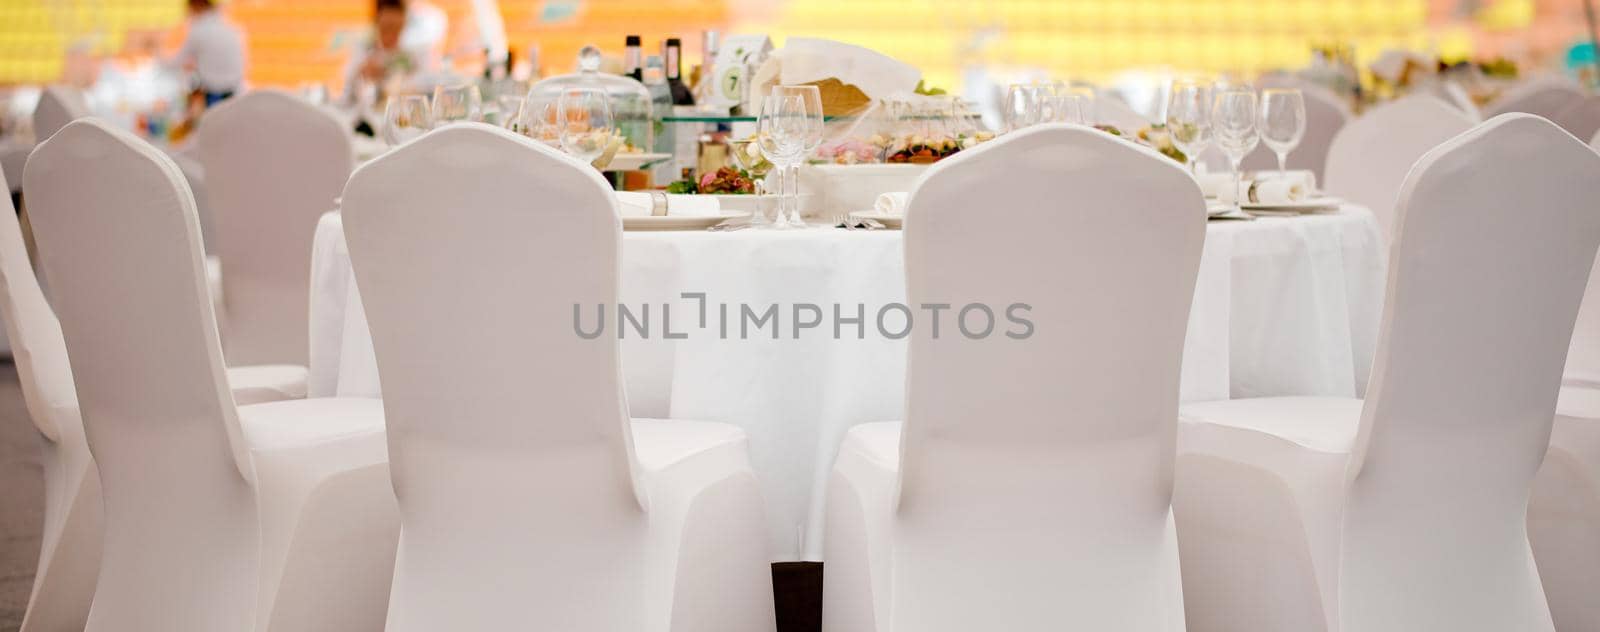 Served a full meal table with chairs in white covers ready to be received by AntonIlchanka